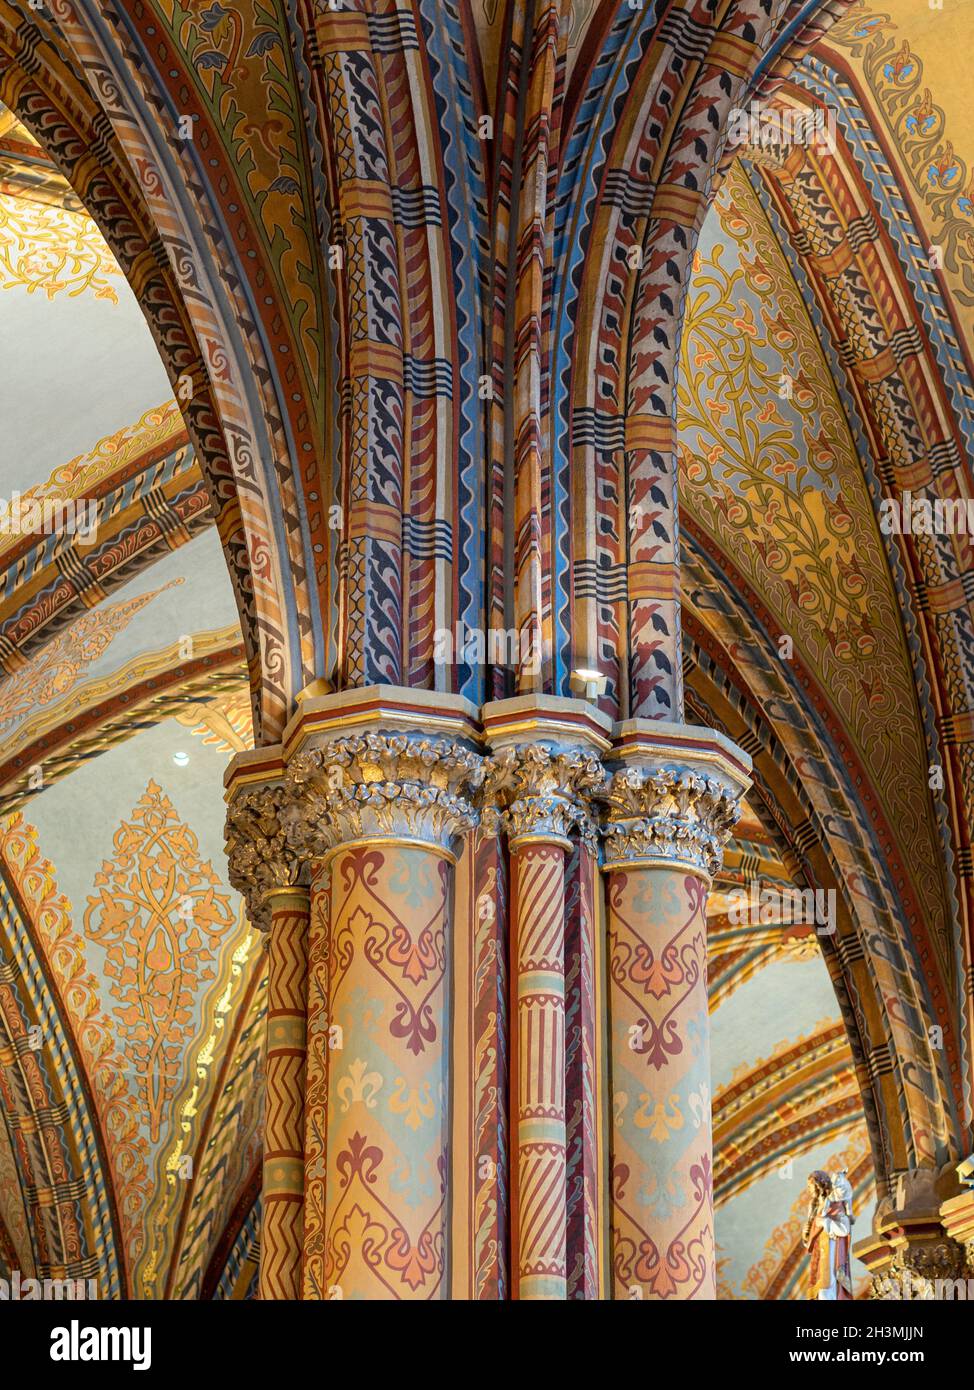 Highly Decorated Column at the Mathias Church: A detailed view of the top of a column and the spreading arch supporting the roof of the Mathias Church in Buda. Stock Photo